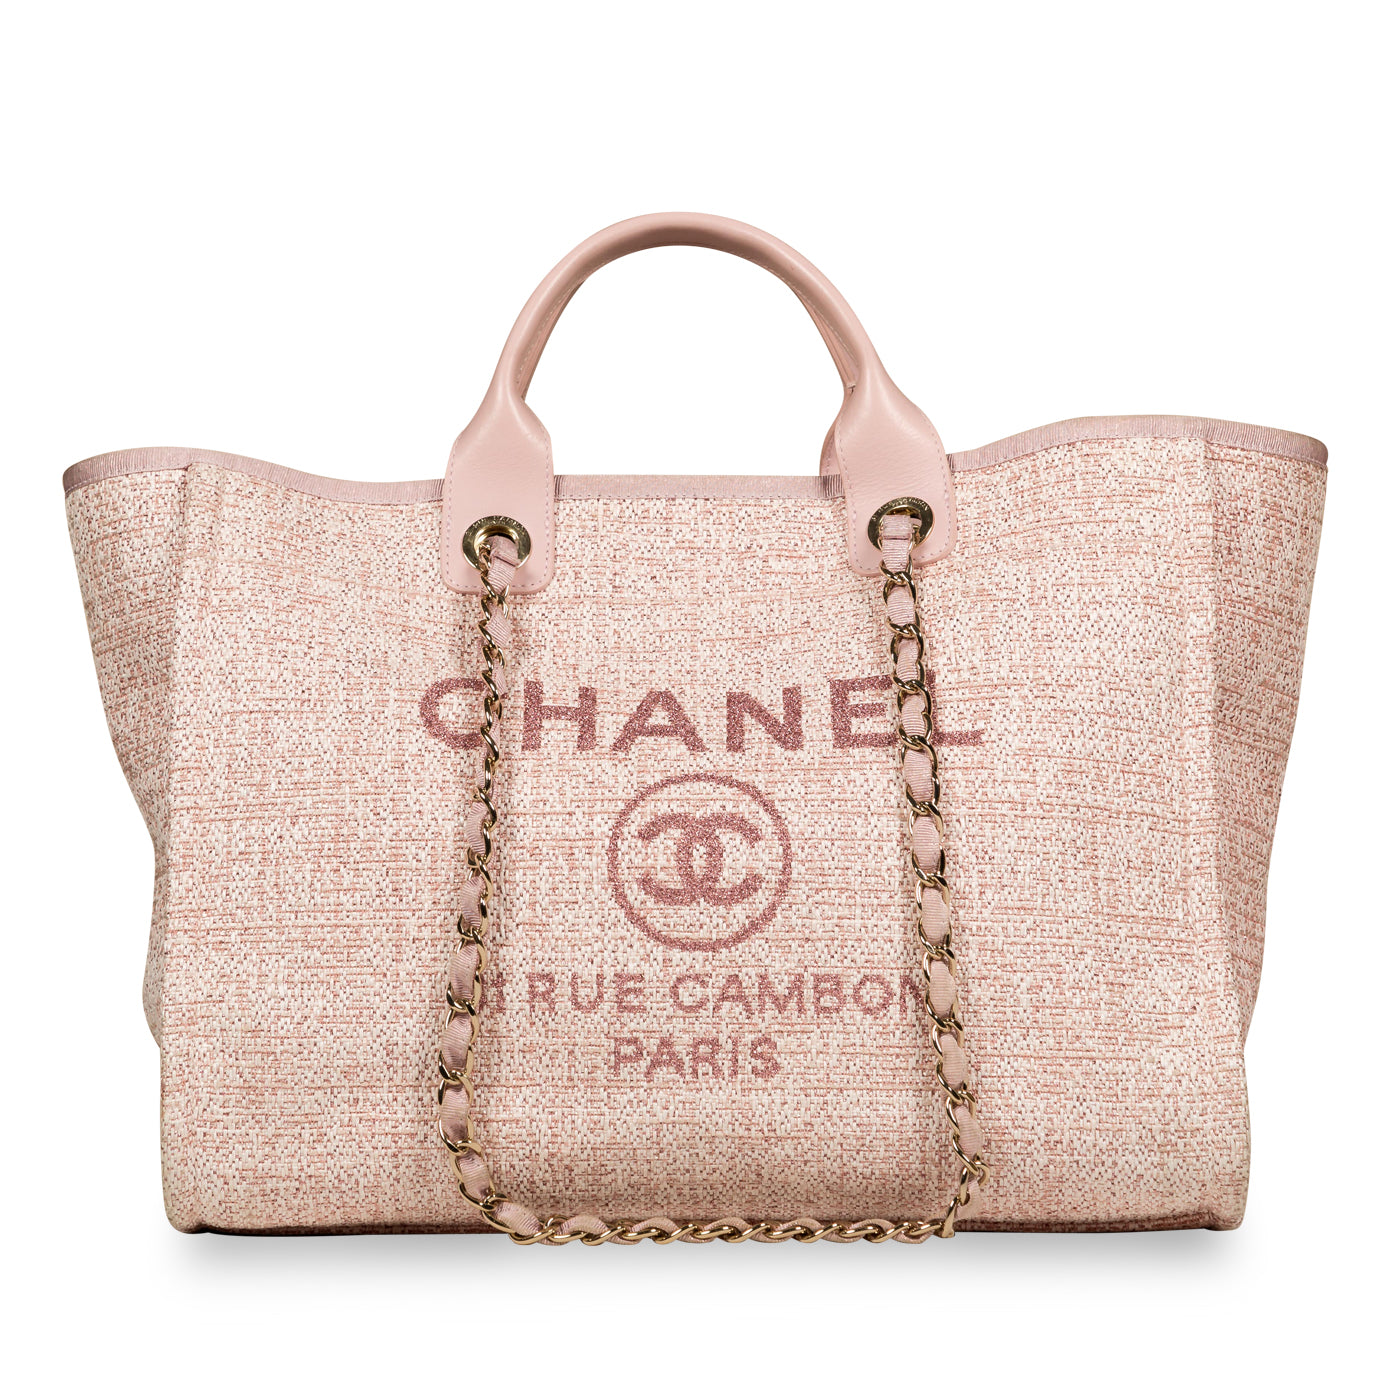 Chanel Deauville Shopping Bag with Sequins, Page 3